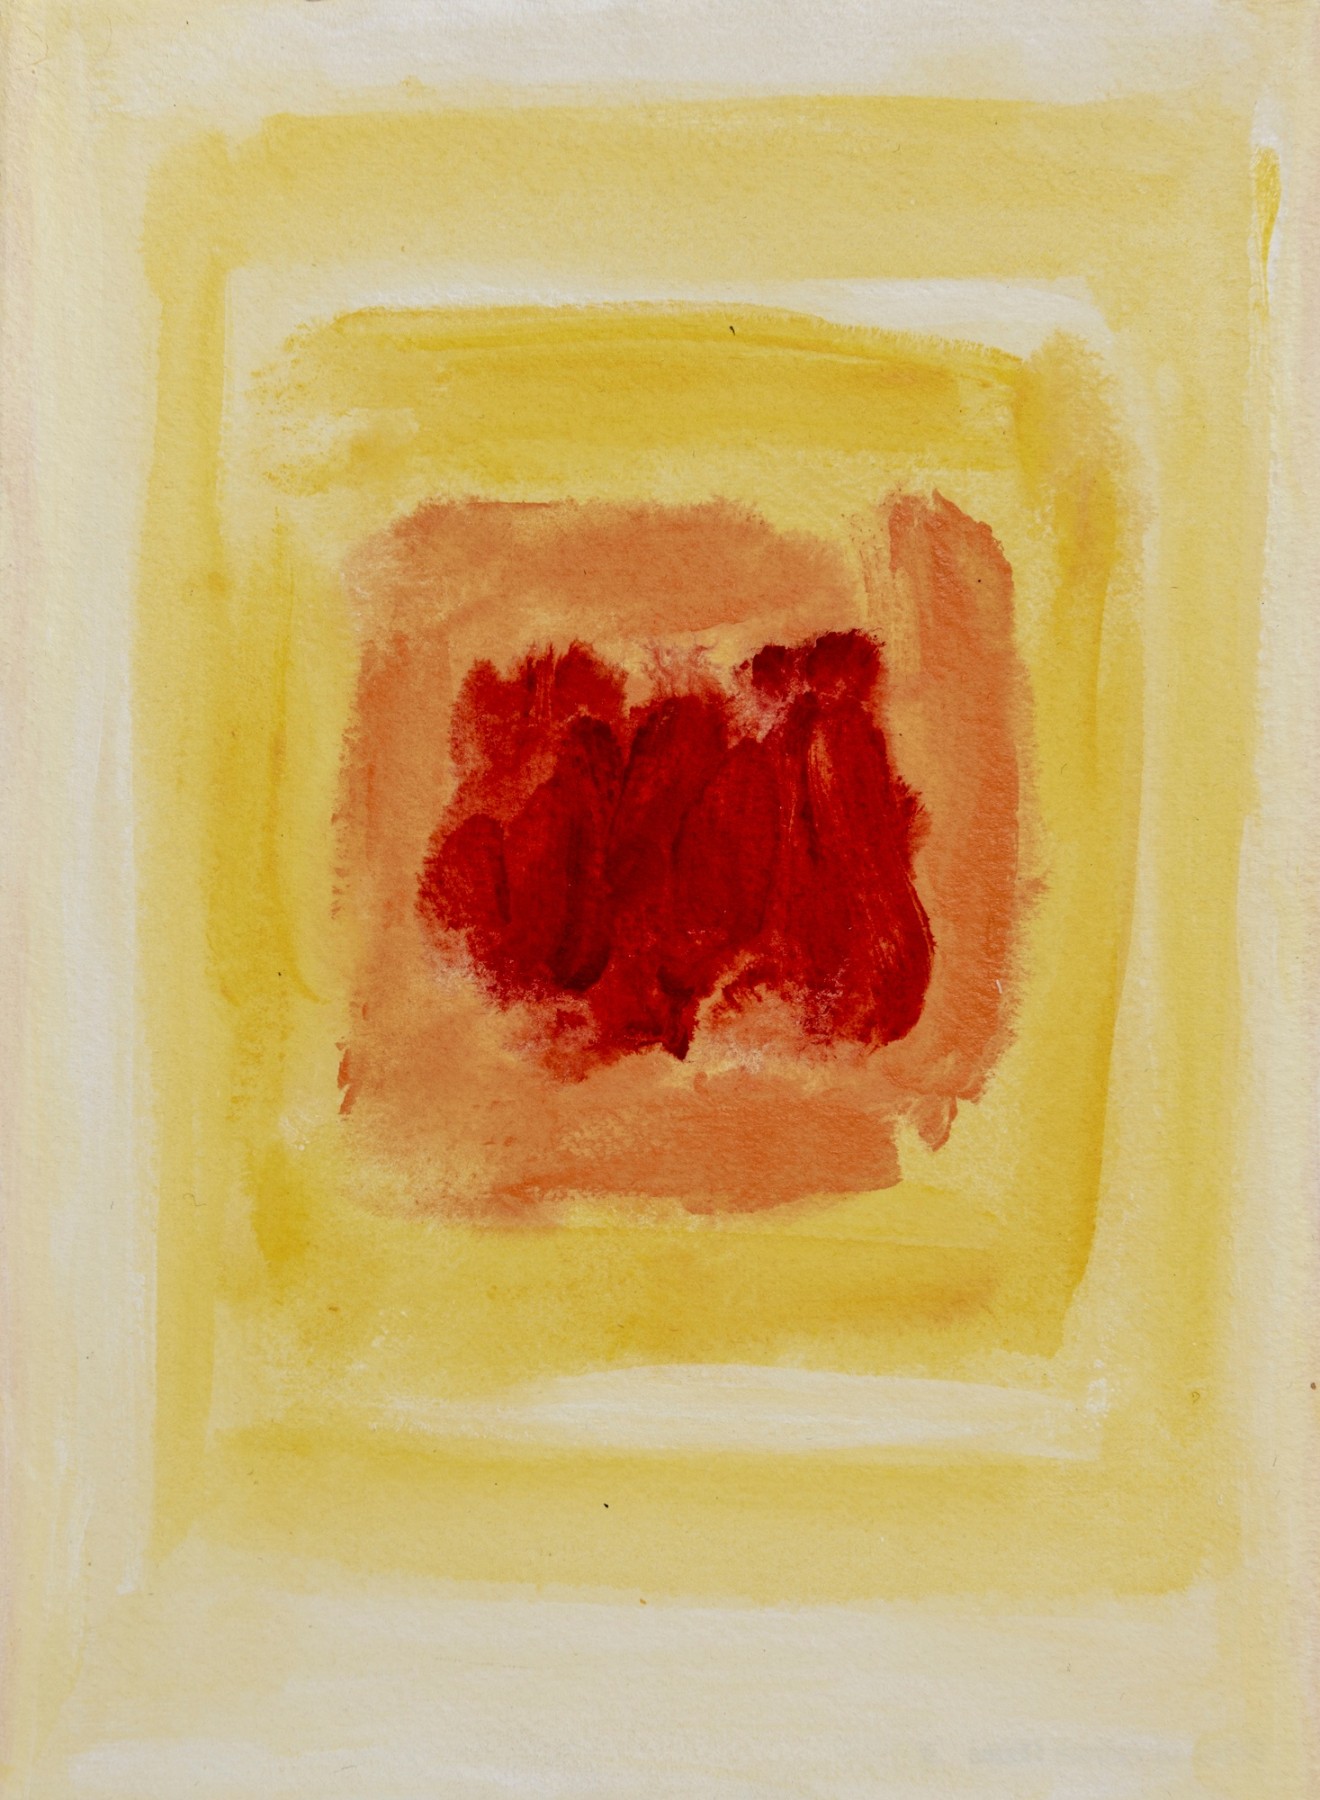 Felrath Hines, Untitled,  Watercolor on paper, 7 x 5 inches,  Unsigned. Pastel yellow, yellow and red painterly rectangles on vertical paper. Felrath Hines worked to create universal visual idioms from a place of complex personal experience. His figurative and cubist-style artwork morphed into soft-edged organic abstracts as he grappled with hues in his chosen oil medium.